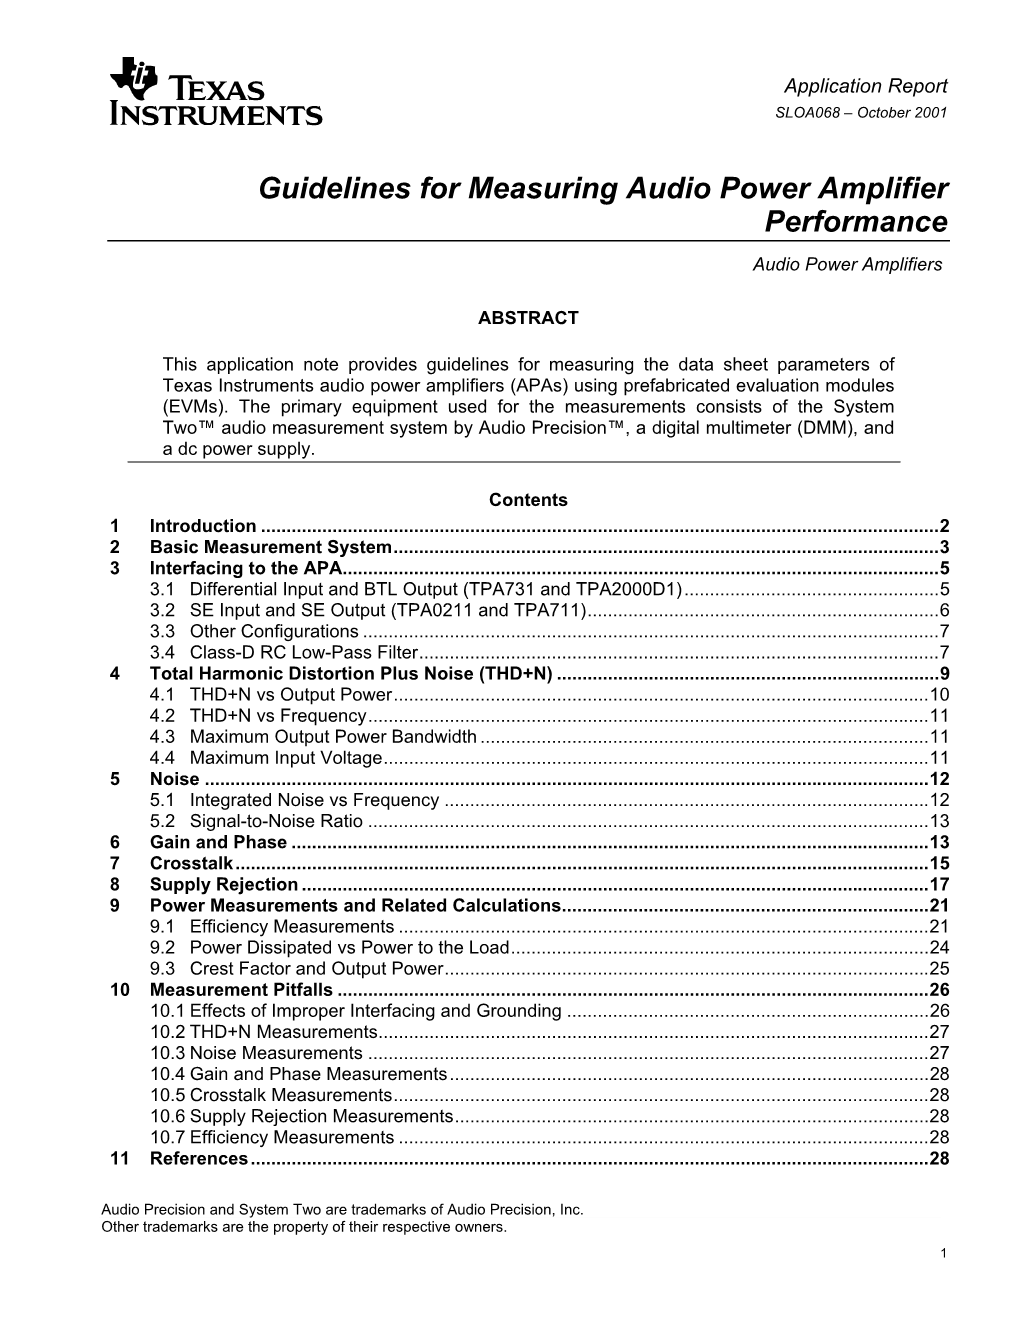 Guidelines for Measuring Audio Power Amplifier Performance